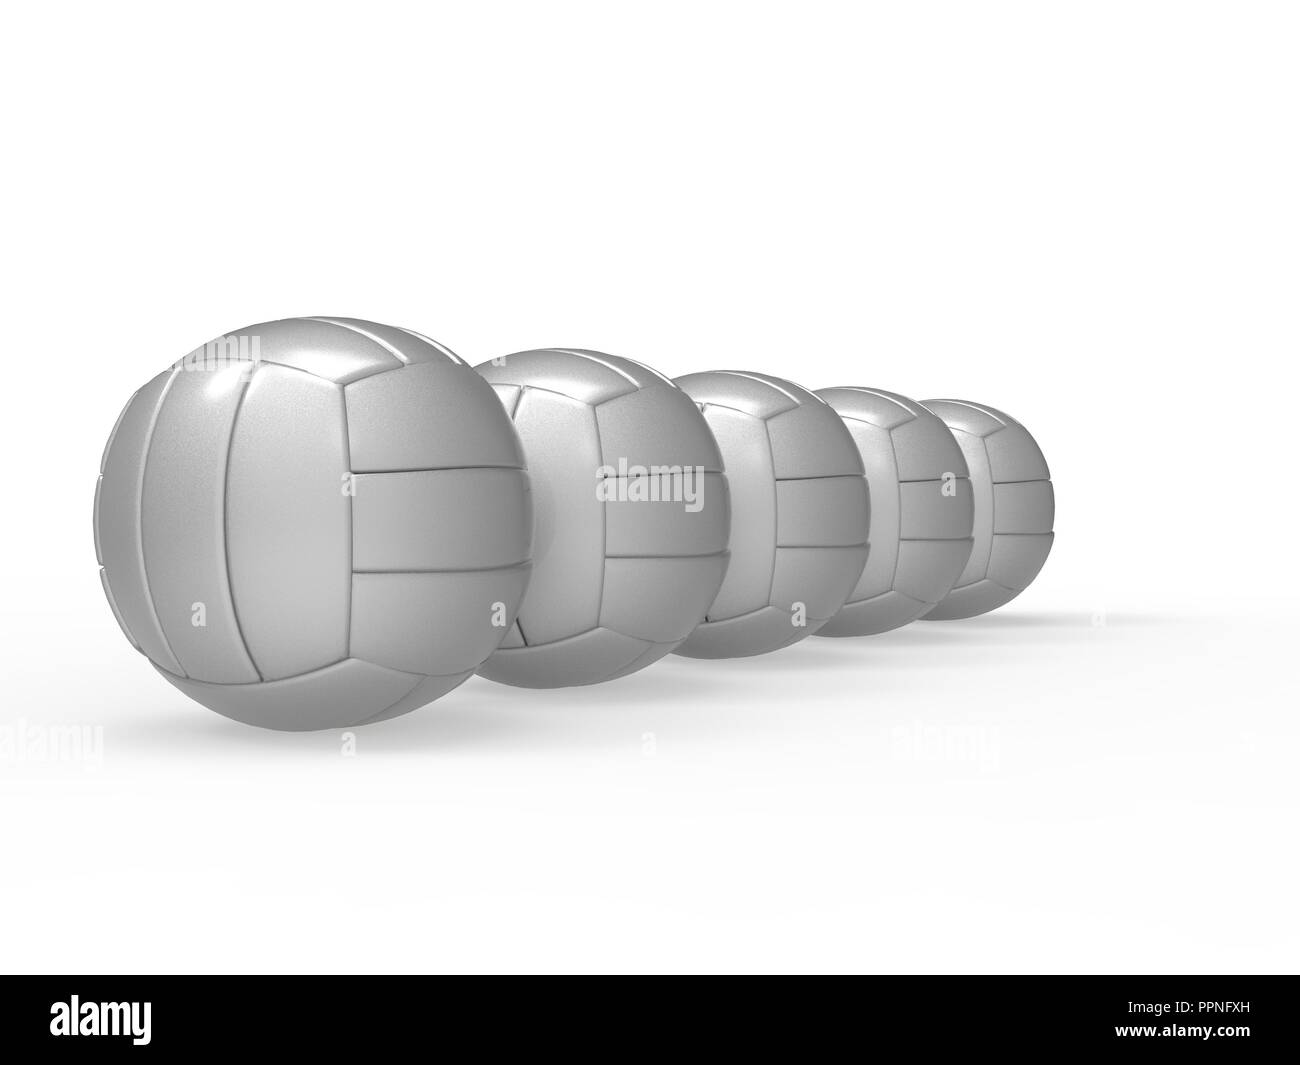 Volleyball Balls 3D rendering Isolated on White Background Stock Photo